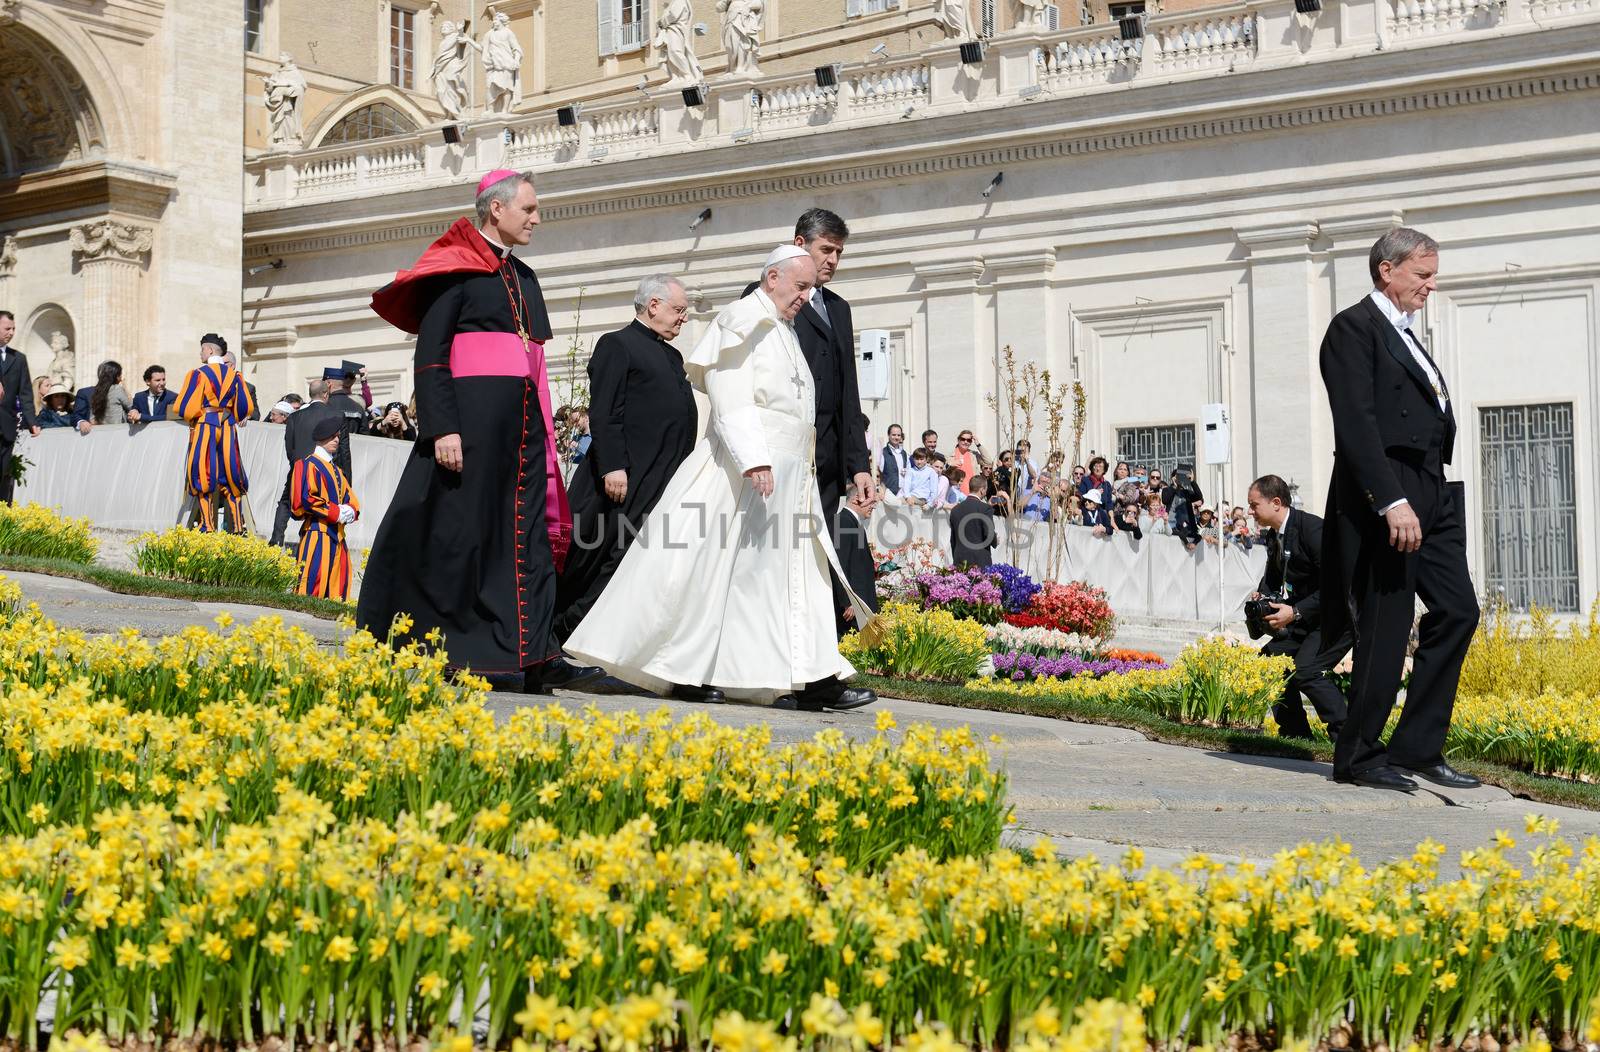 VATICAN: Pope Francis walks on St Peter's square during his weekly general audience on March 30, 2016, at the Vatican.